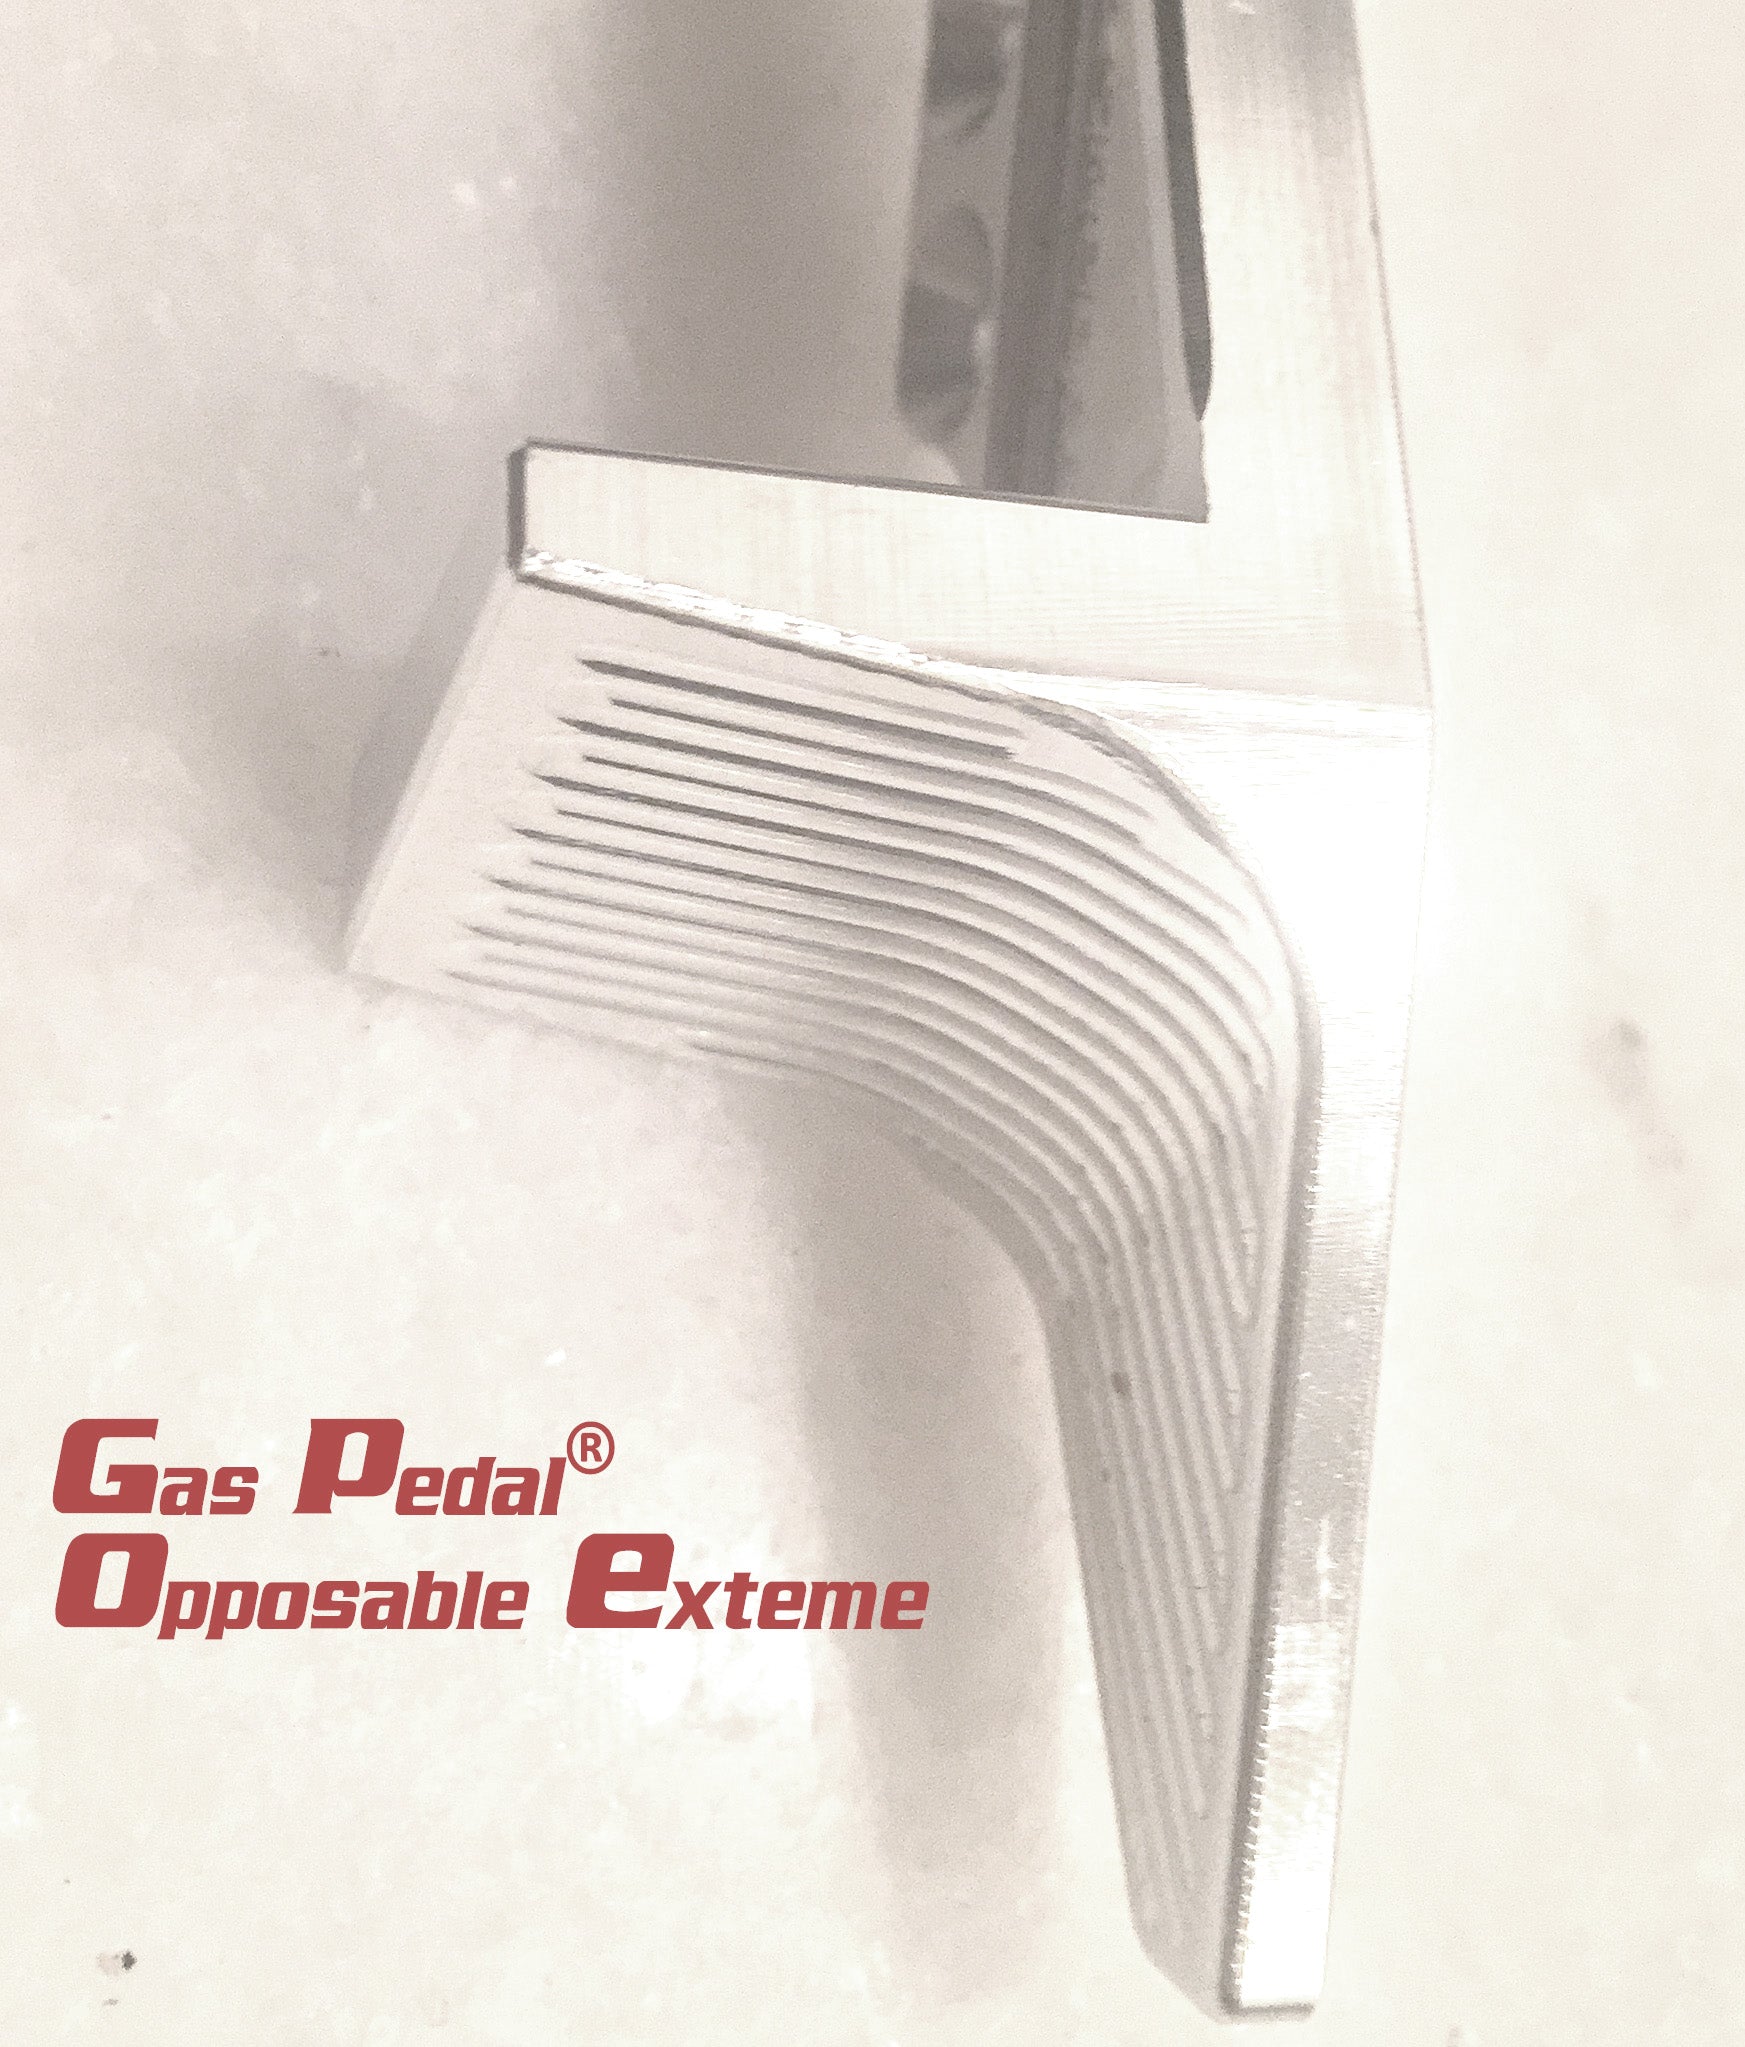 Gas Pedal Opposable Extreme